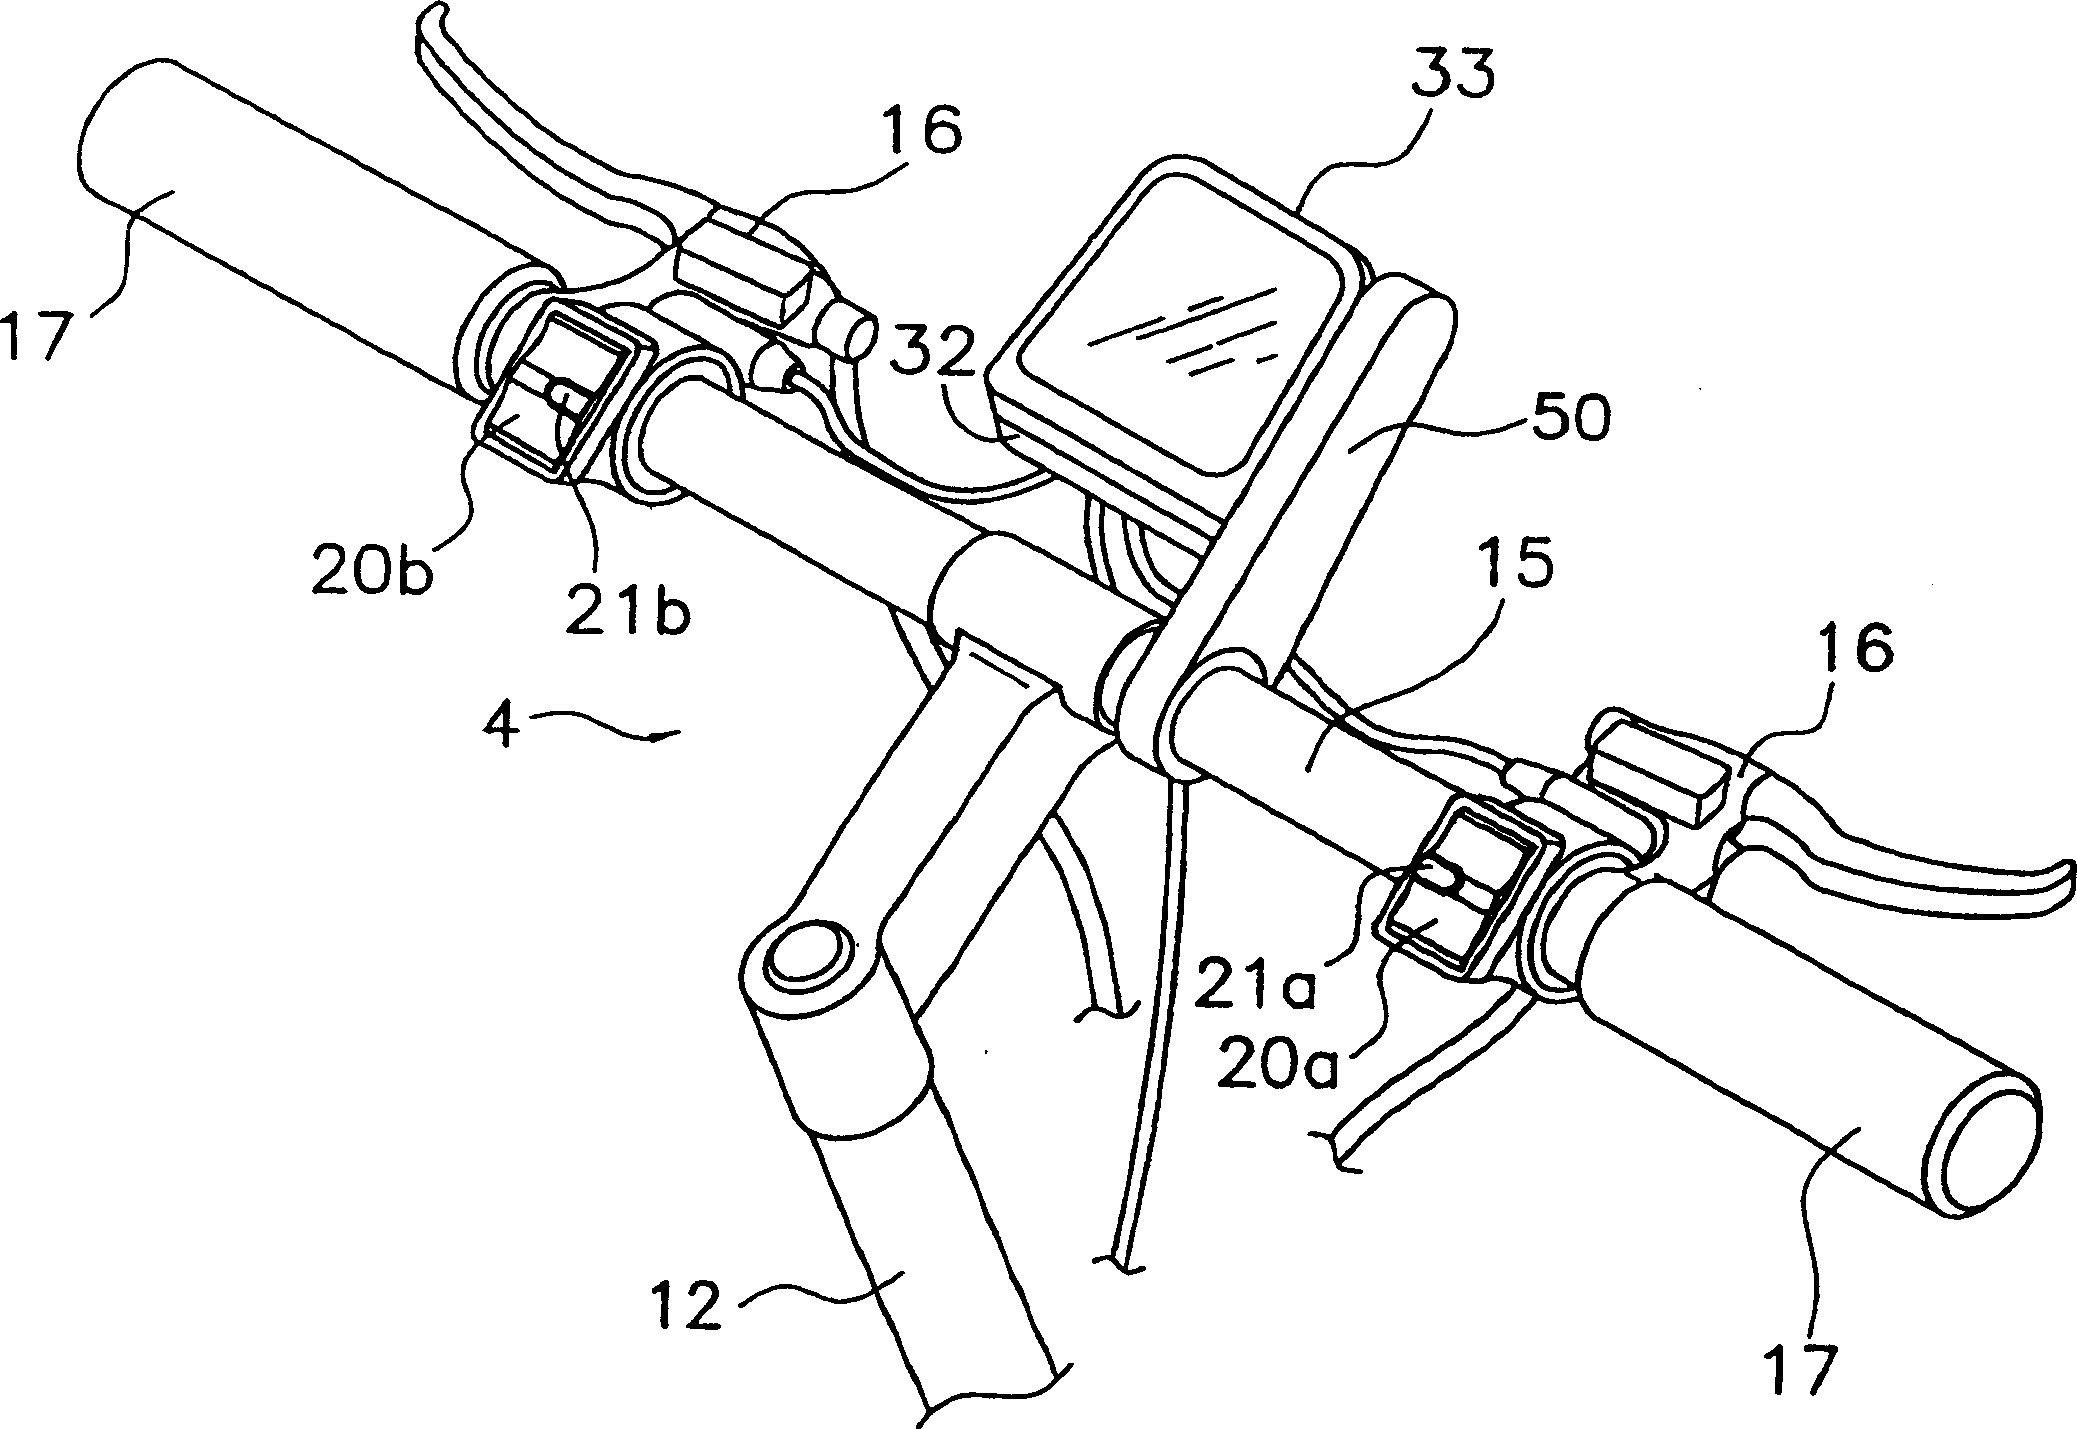 Electricity part driving device for bicycle